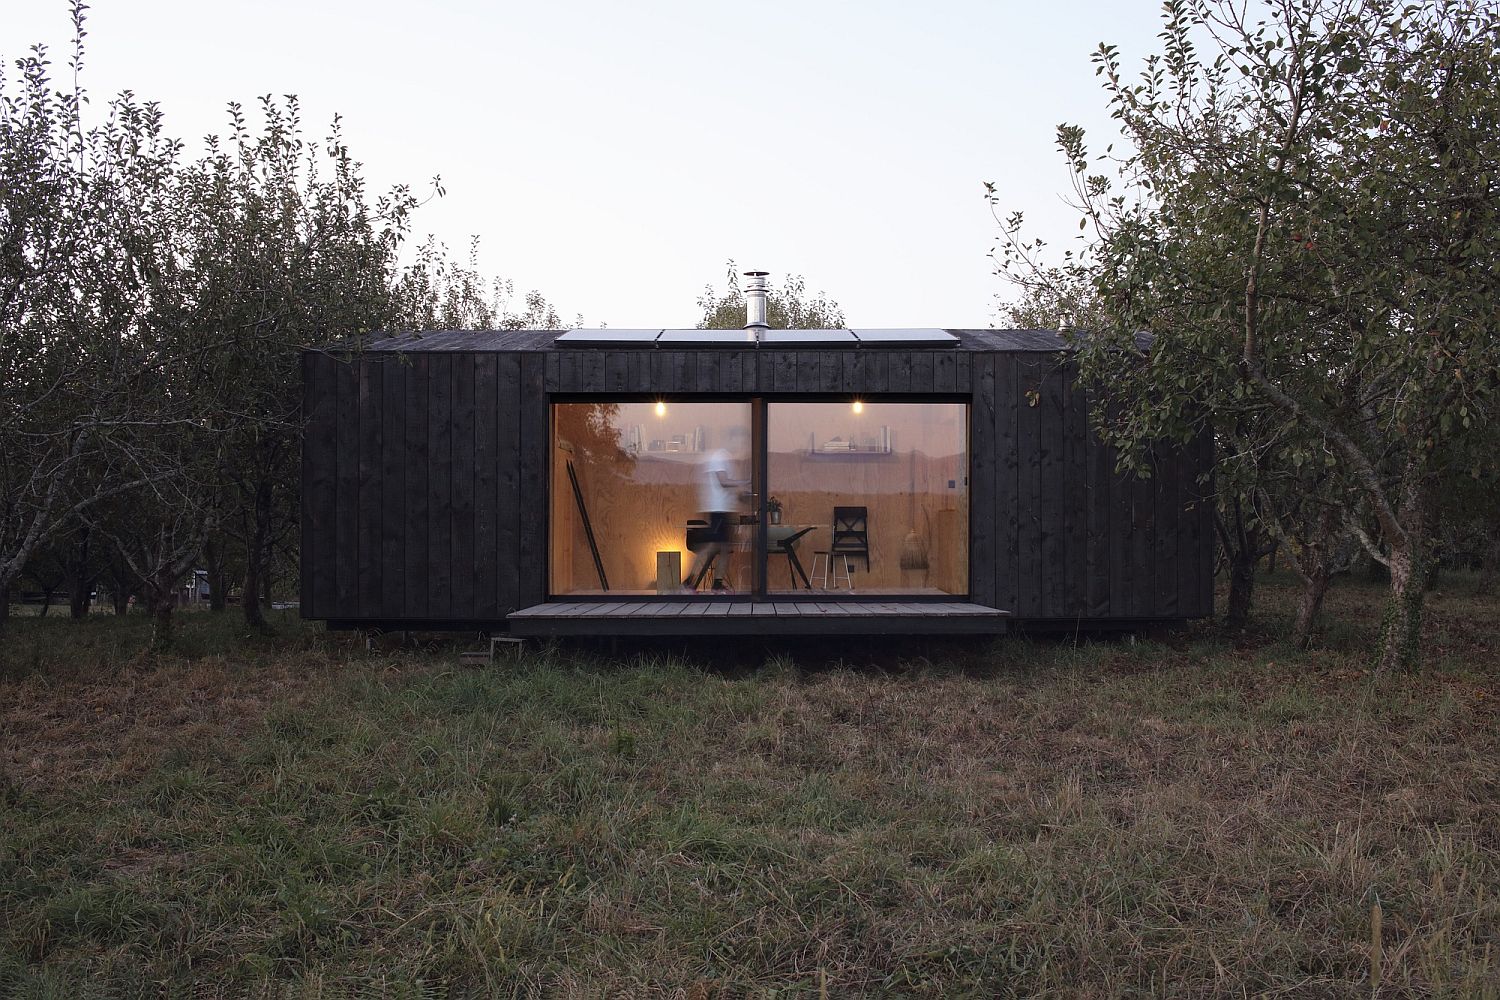 H- Eva Cabin in France allows you to connect with nature